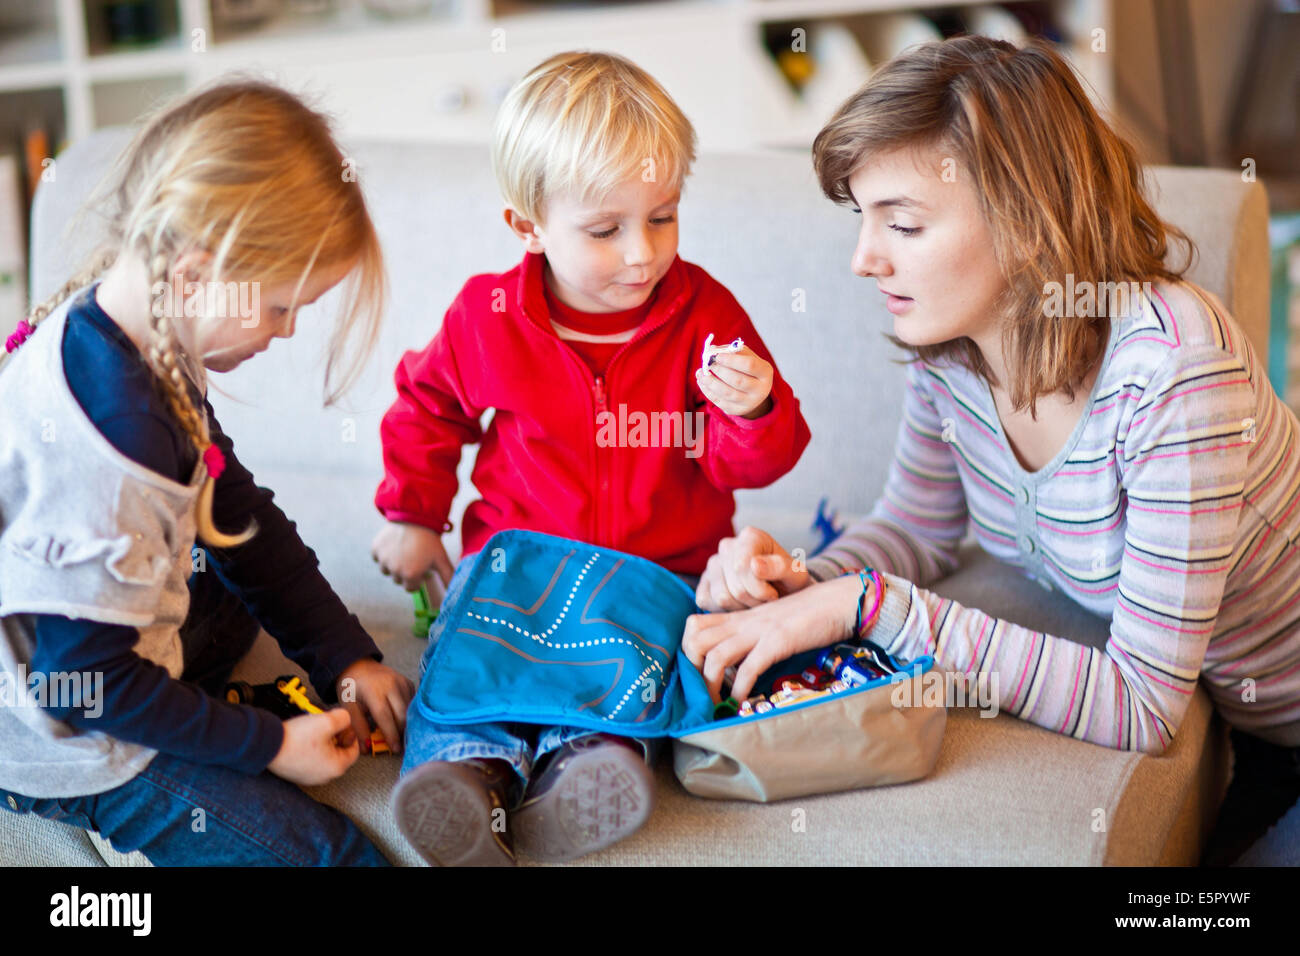 Teenage girl and 3-year-old boy playing with figurines. Stock Photo